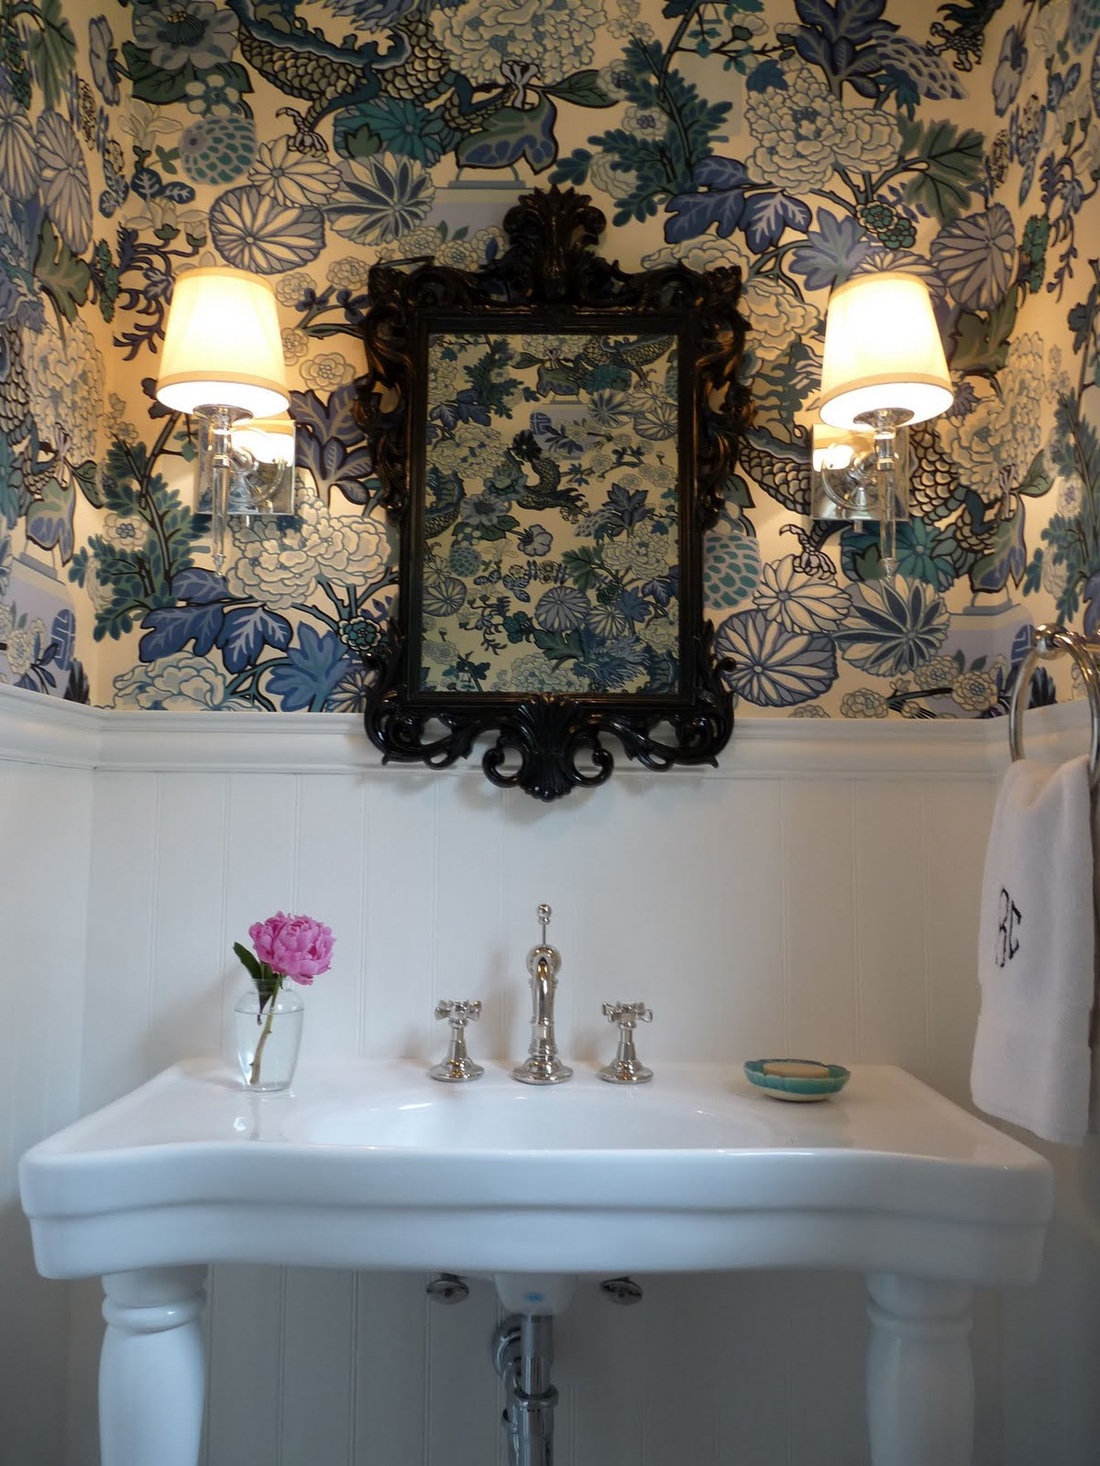 Eclectic Home Tour – Bold Powder Room!